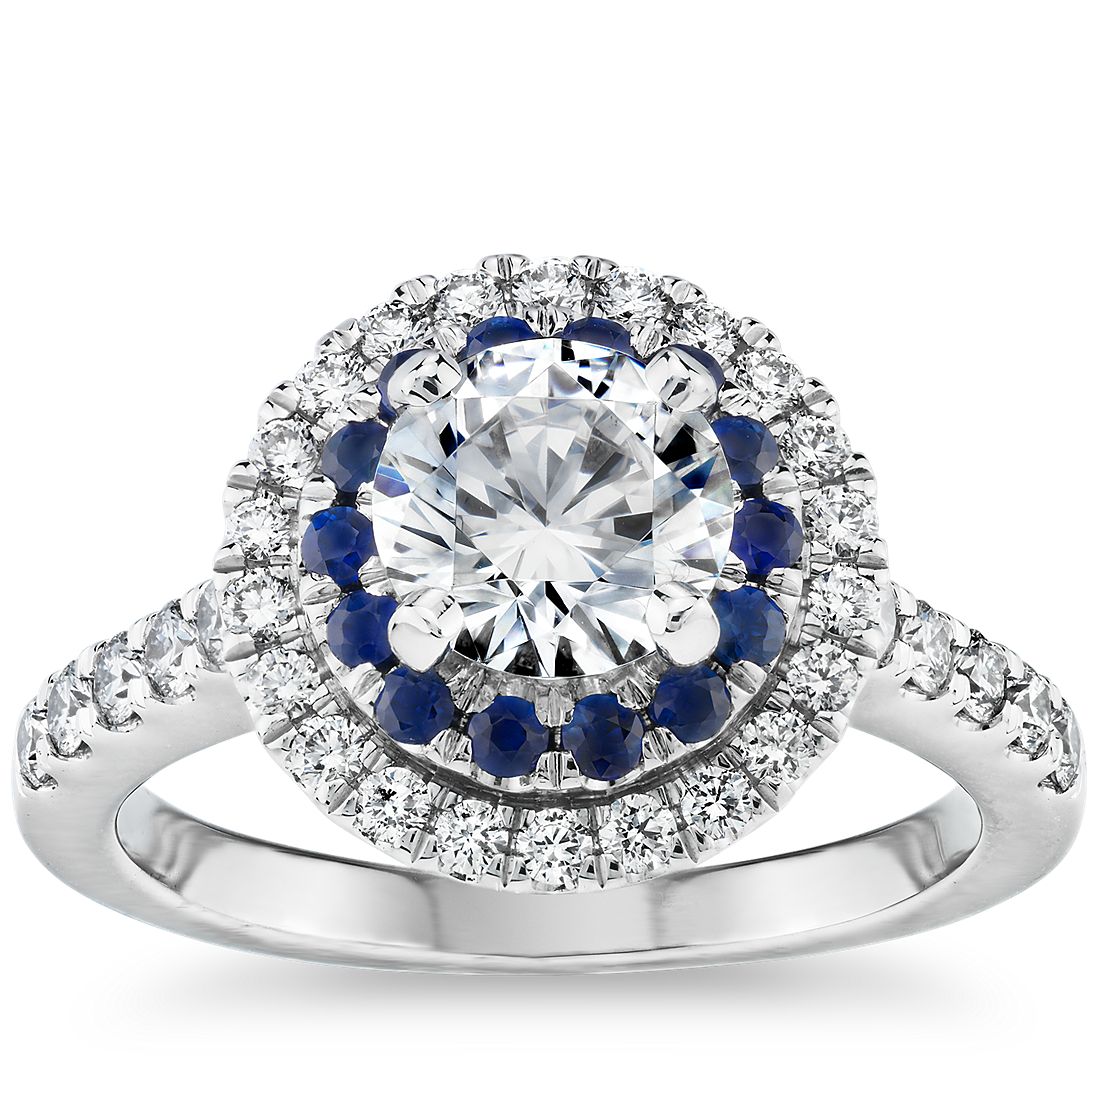 3 ct Round Cut Halo Blue Sapphire & Diamond Engagement Ring 14K White Gold Over 